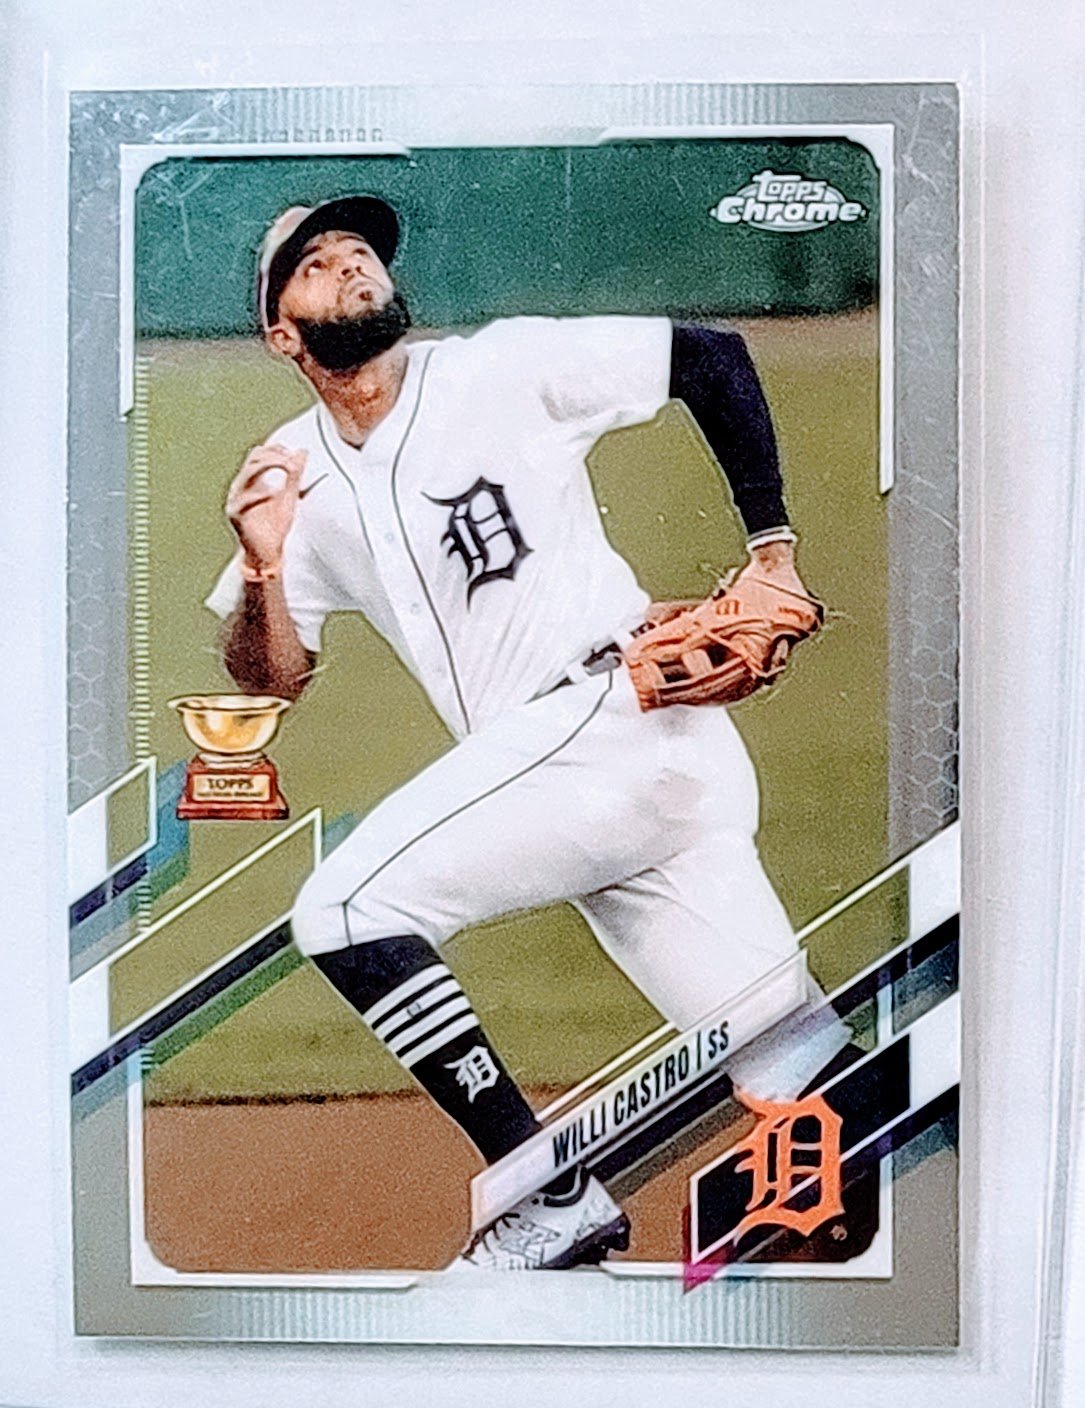 2021 Topps Chrome Willi Castro All Star Rookie Cup Baseball Trading Card TPTV simple Xclusive Collectibles   